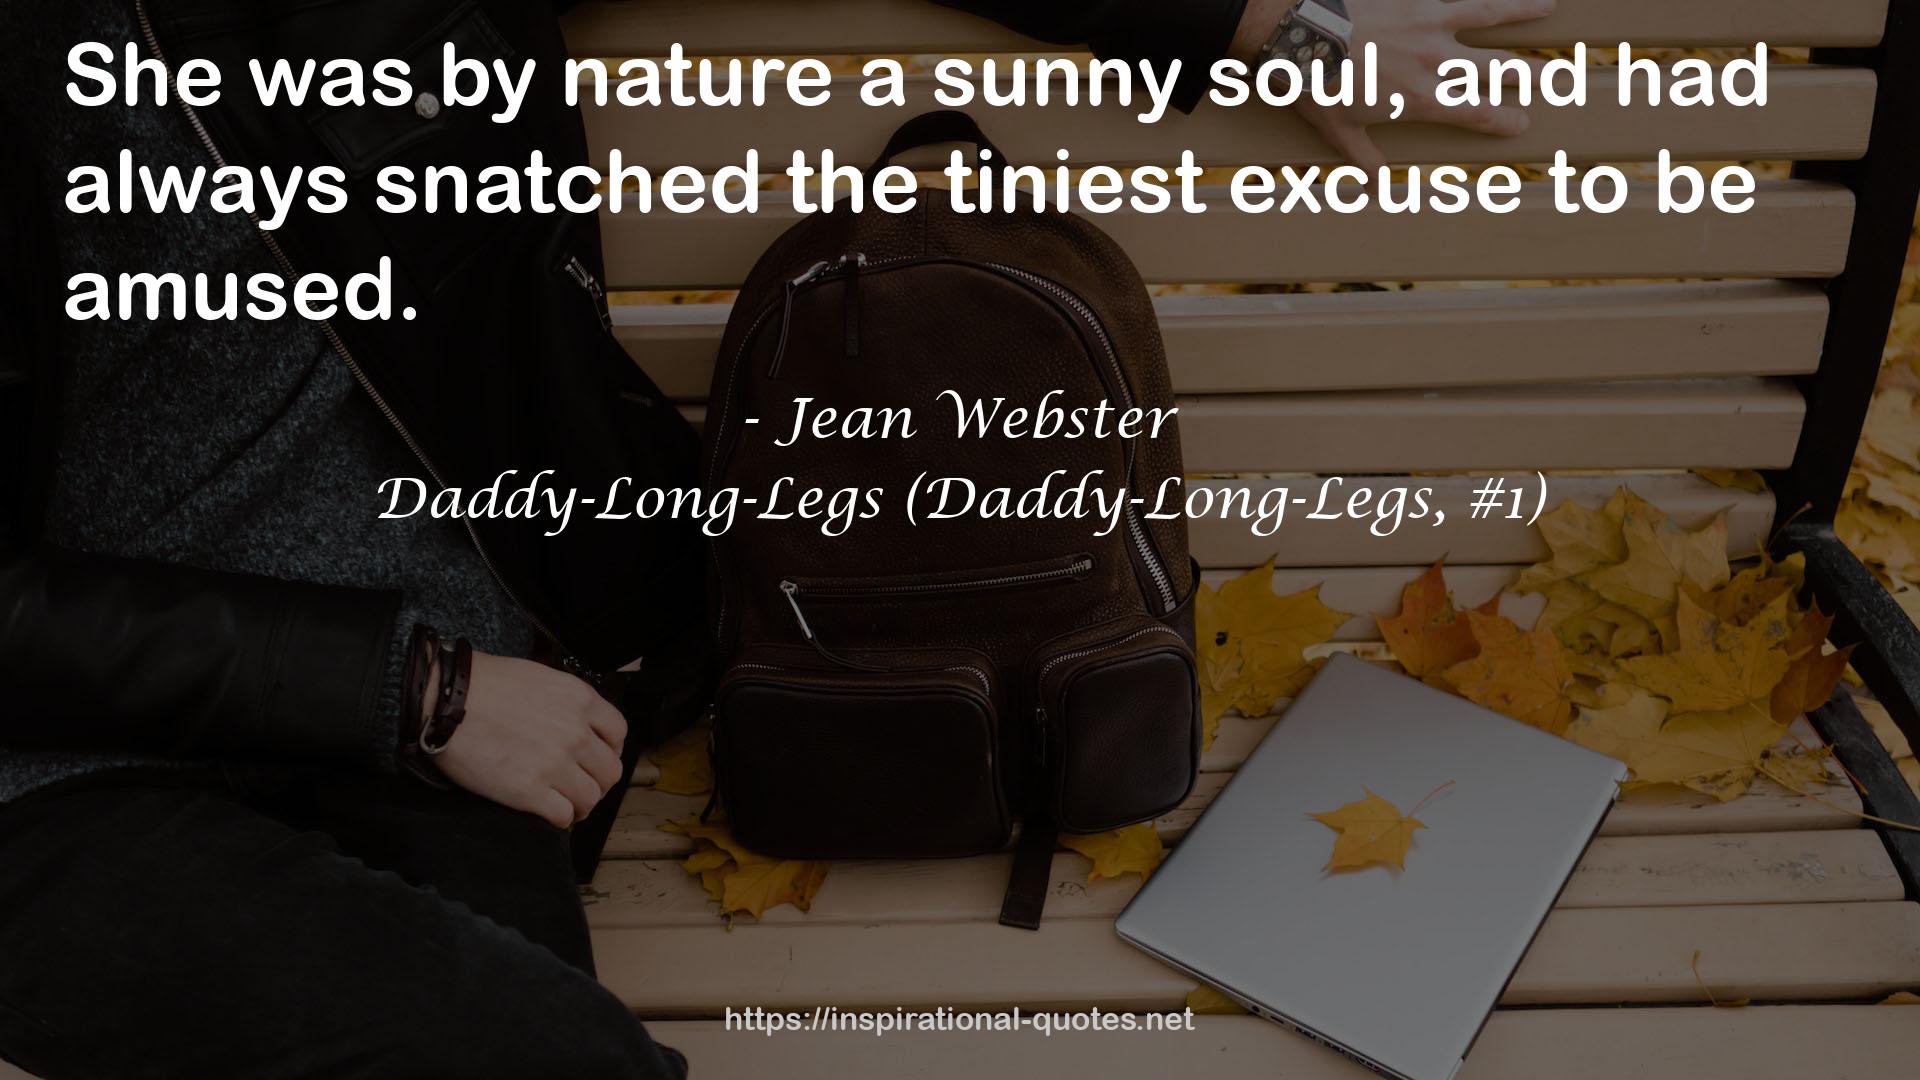 Daddy-Long-Legs (Daddy-Long-Legs, #1) QUOTES